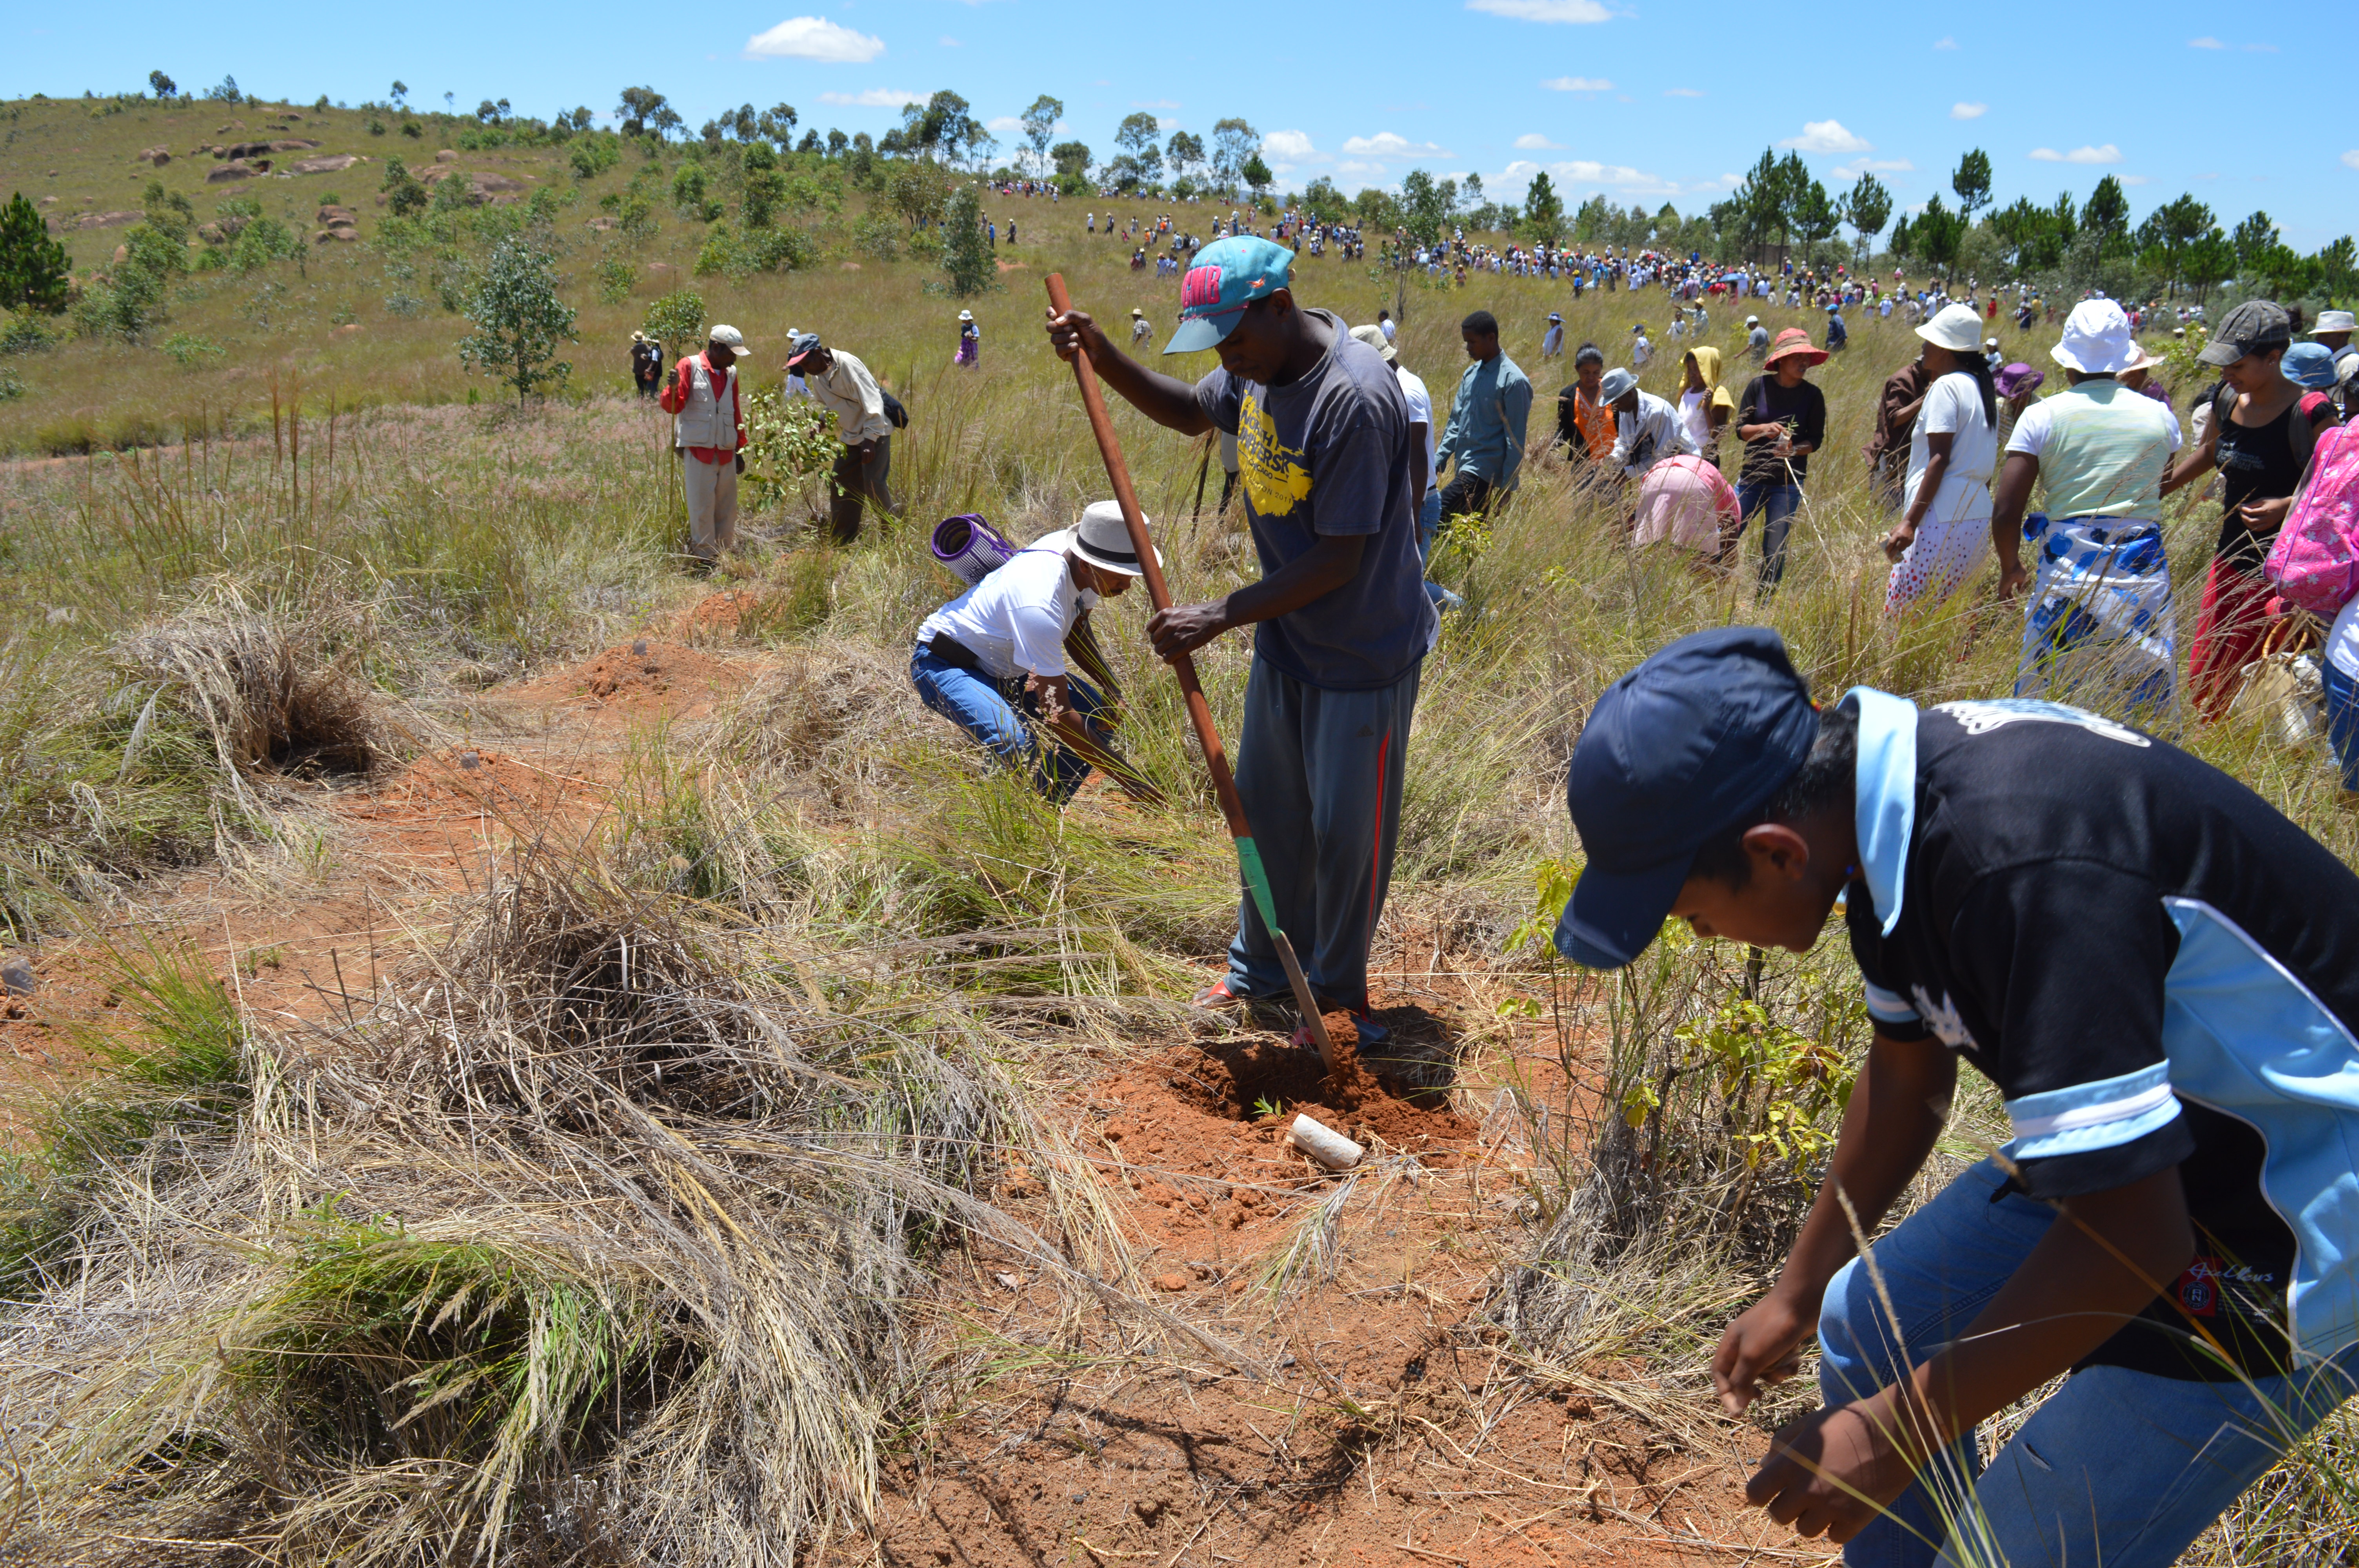 FJKM tree planting with crowd. Caption: Thousands of FJKM members turned out to plant 4,000 fast-growing trees at Fihaonana on February 4, 2017